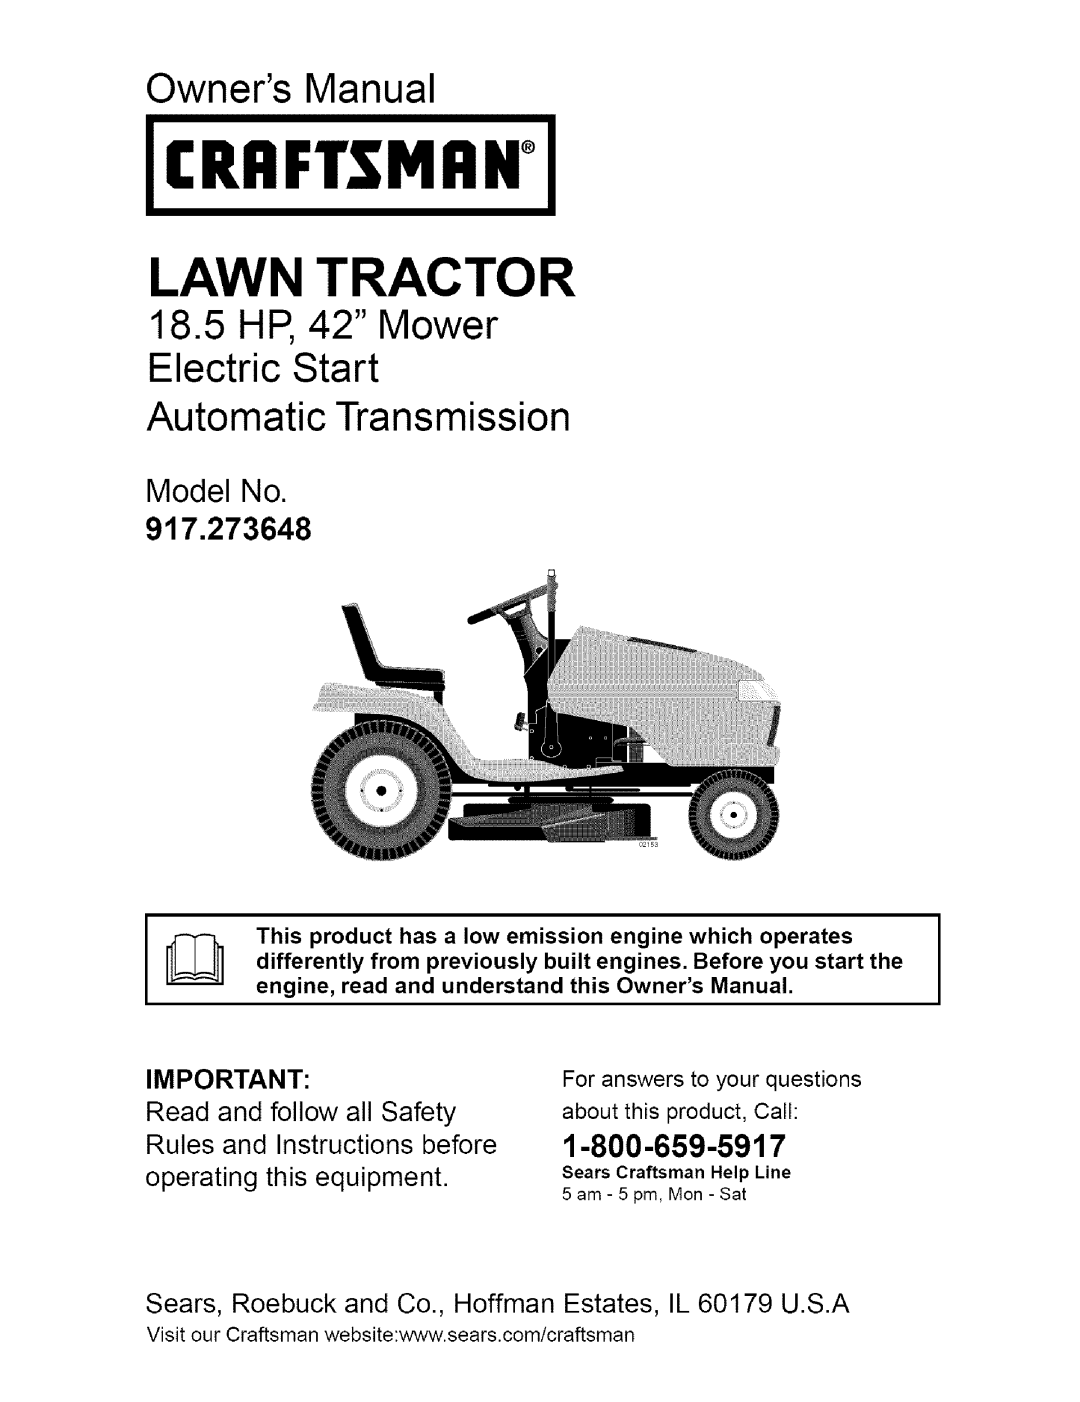 Craftsman 917.273648 manual Owners Manual, Automatic Transmission, Criiftsmhn, Lawn Tractor, Model No, 1-800-659-5917 